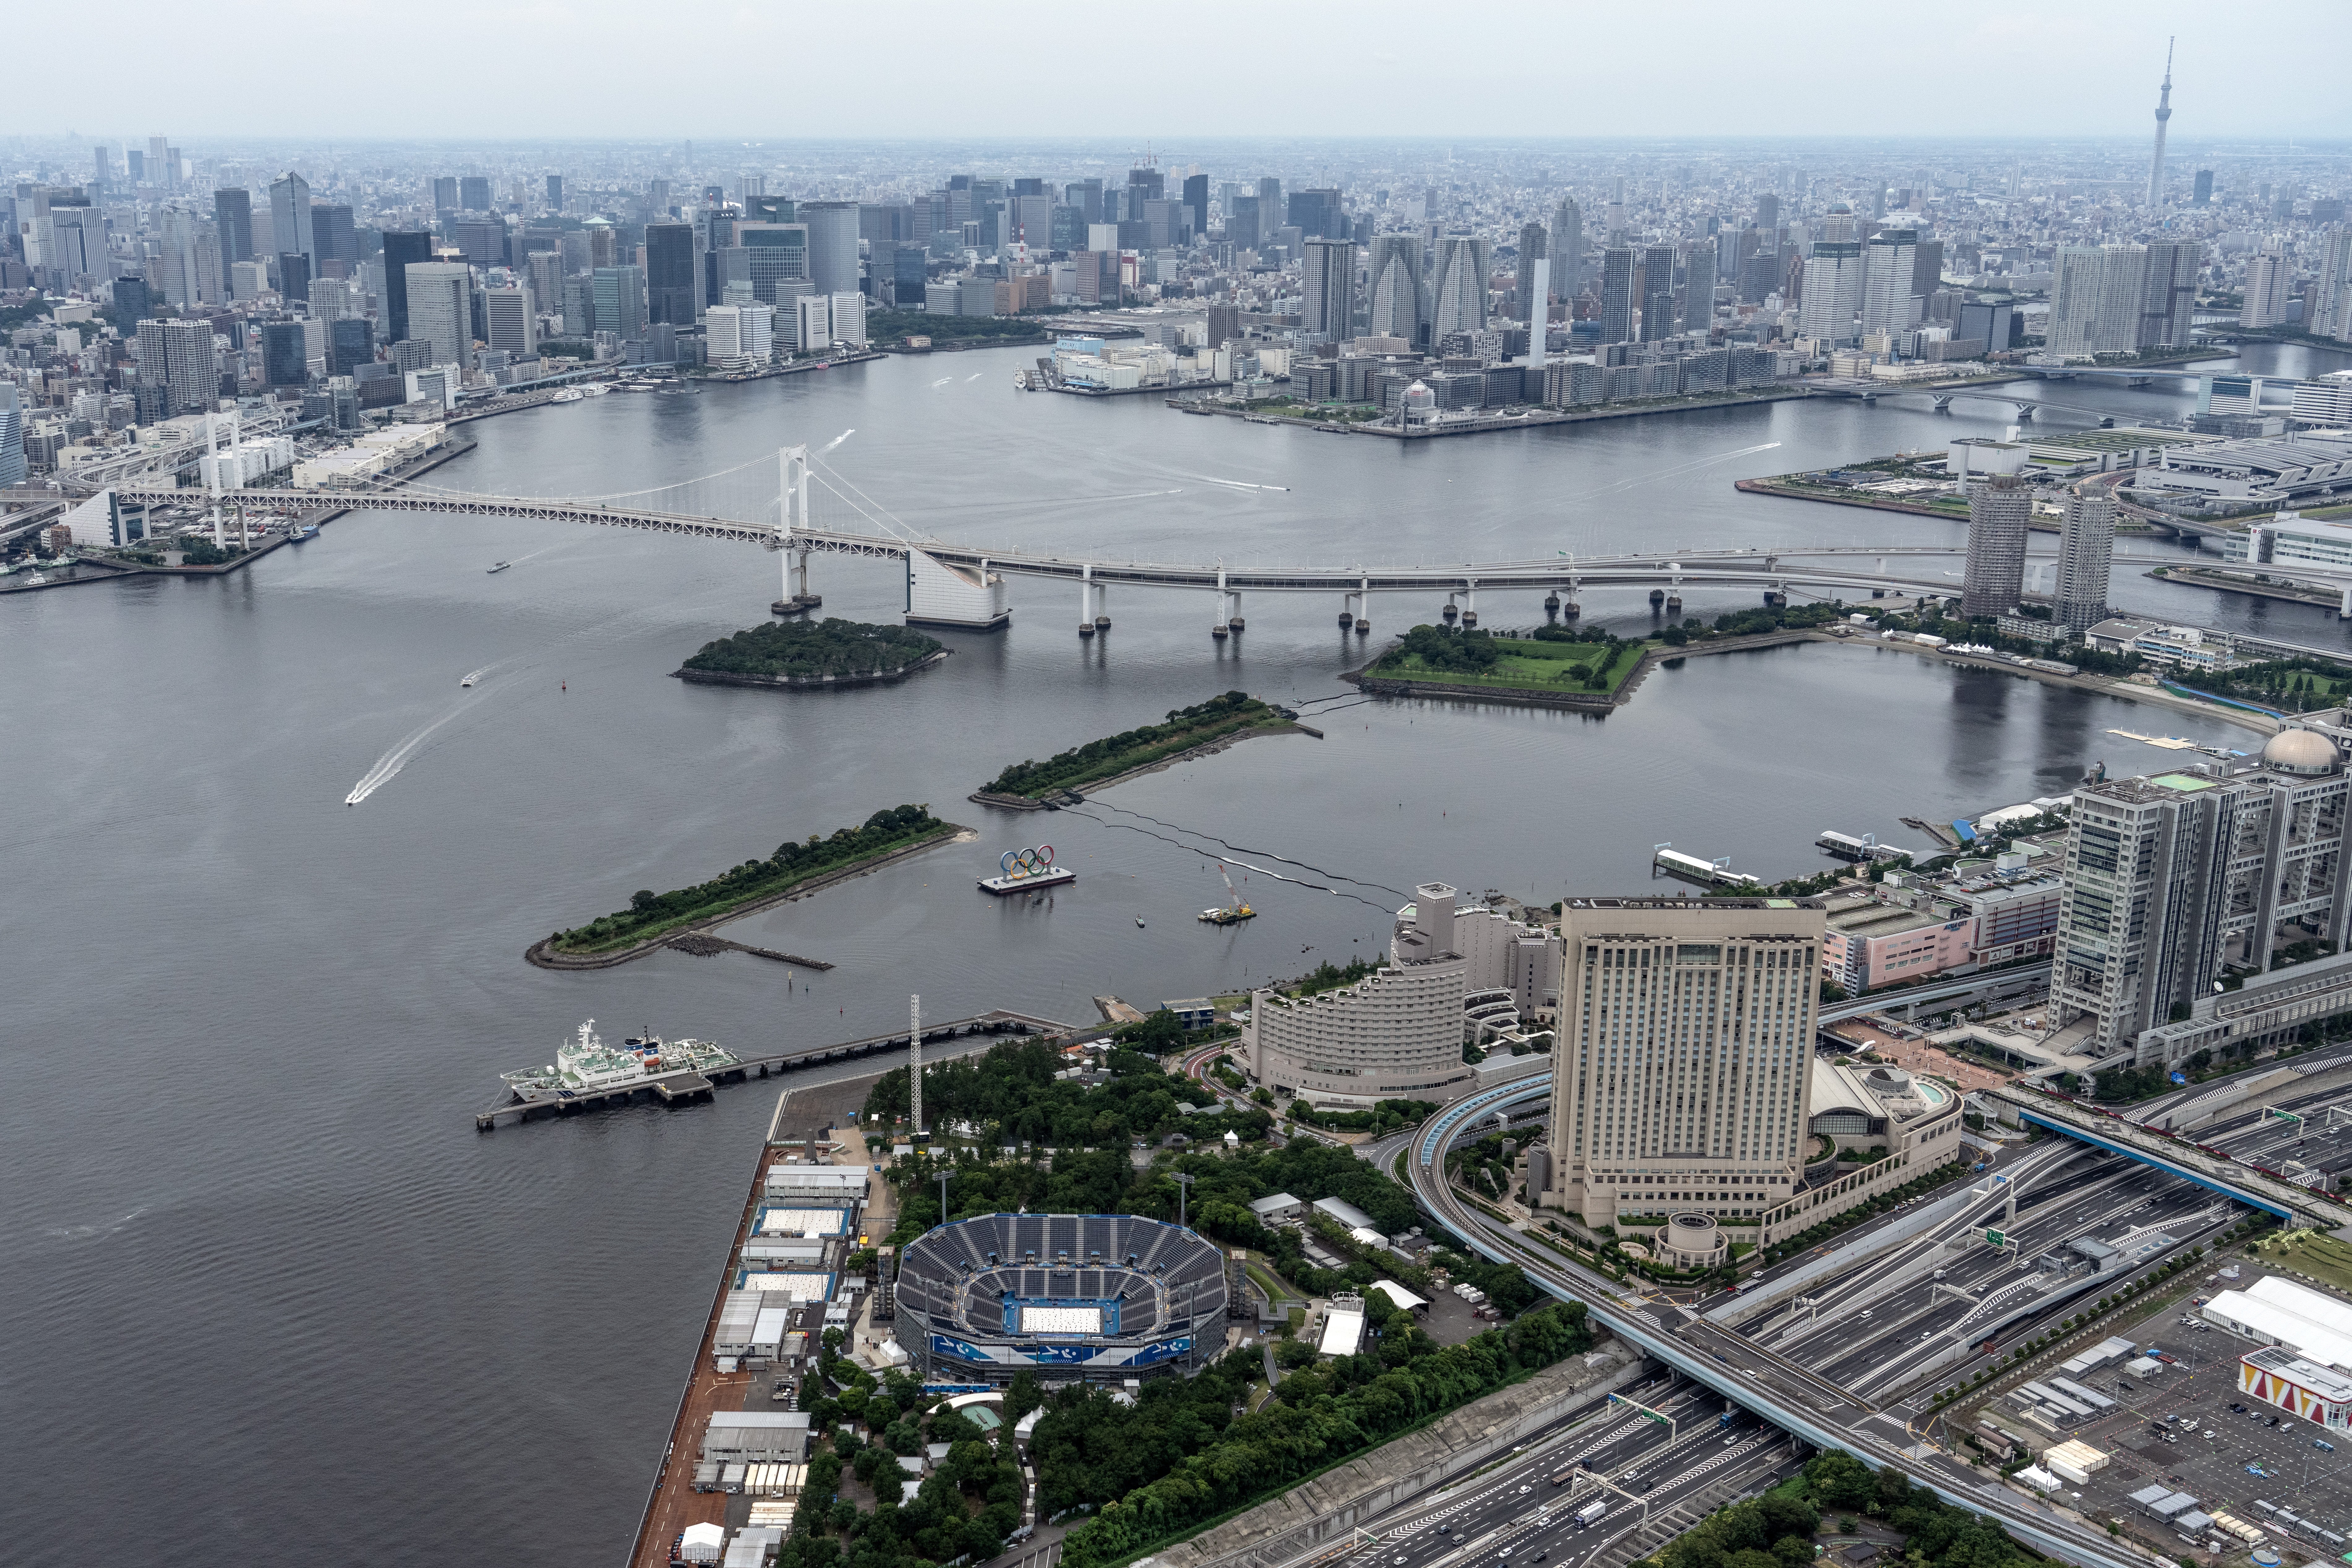 Tokyo Bay, Odaiba Marine Park and the Tokyo Olympic beach volleyball stadium are pictured from a helicopter on 26 June 2021 in Tokyo, Japan